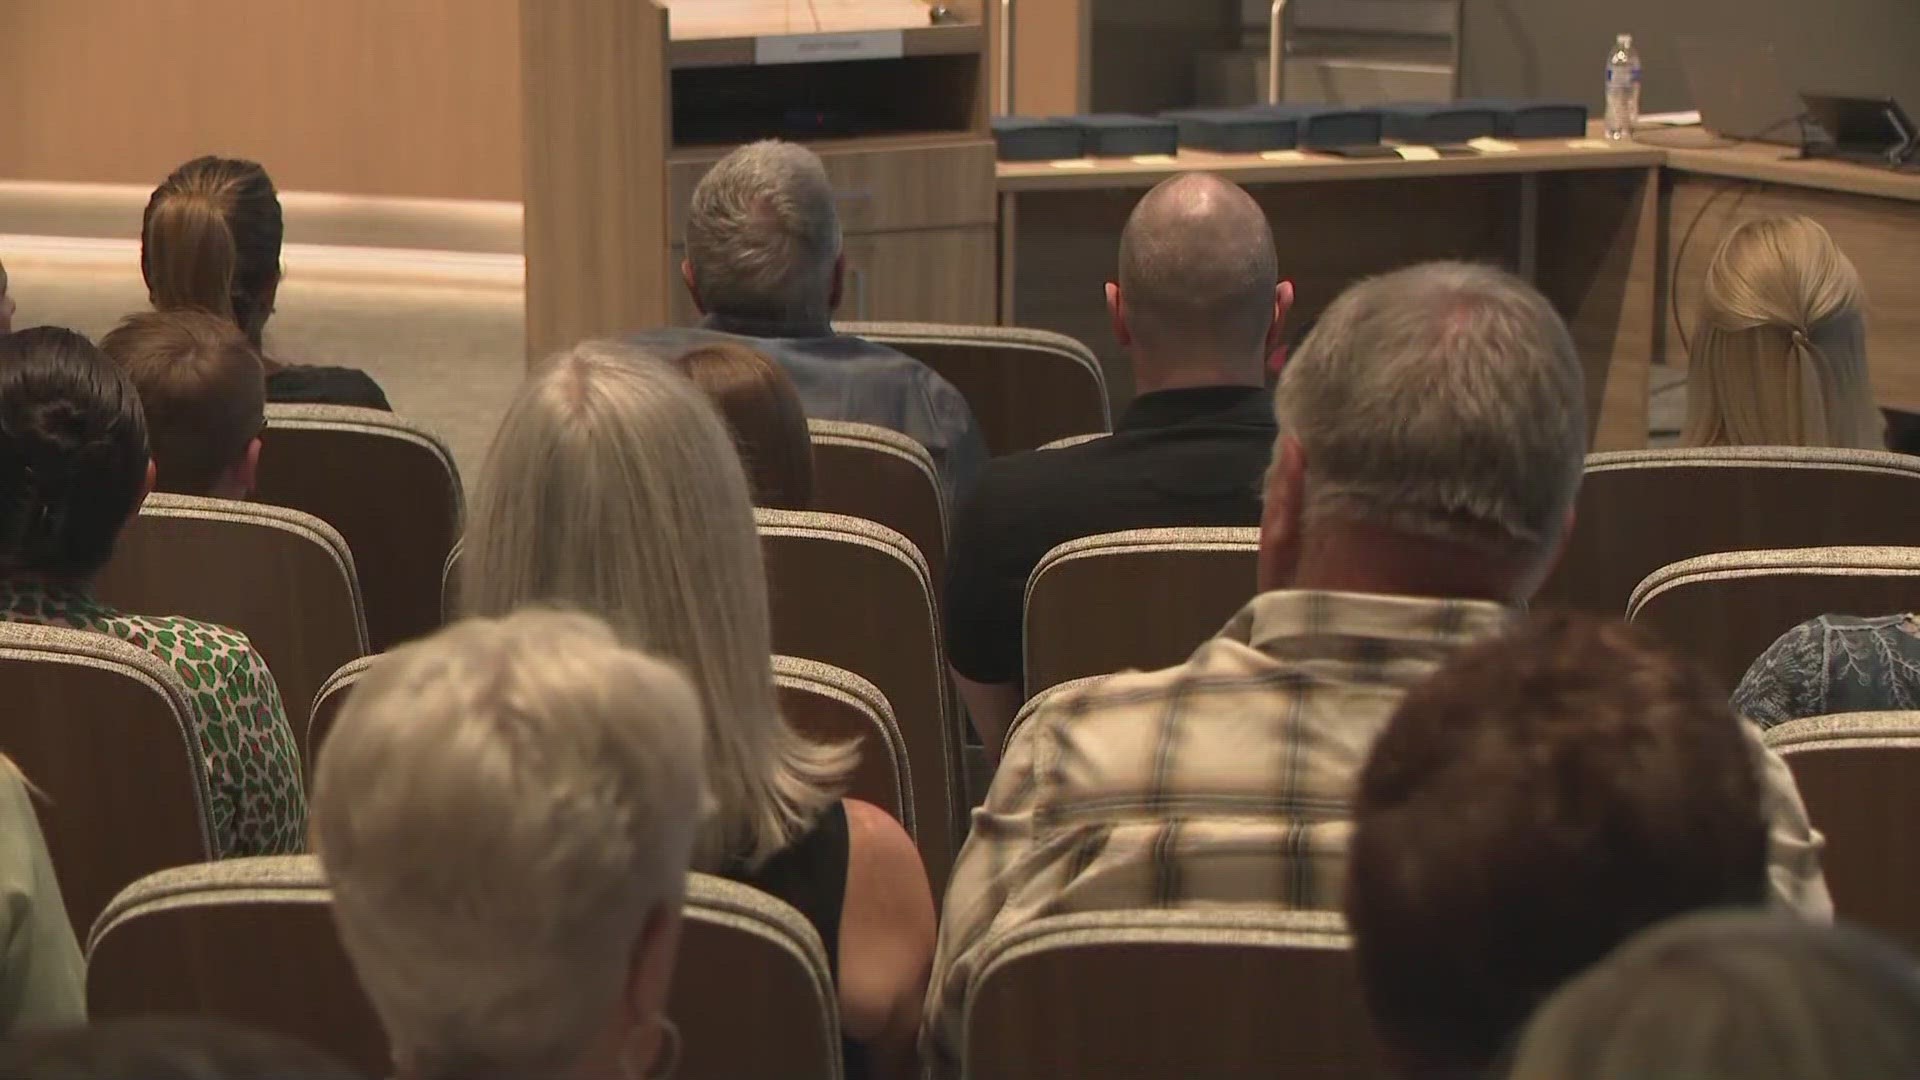 In a meeting Tuesday night the community discussed solutions for teen violence in the East Valley.